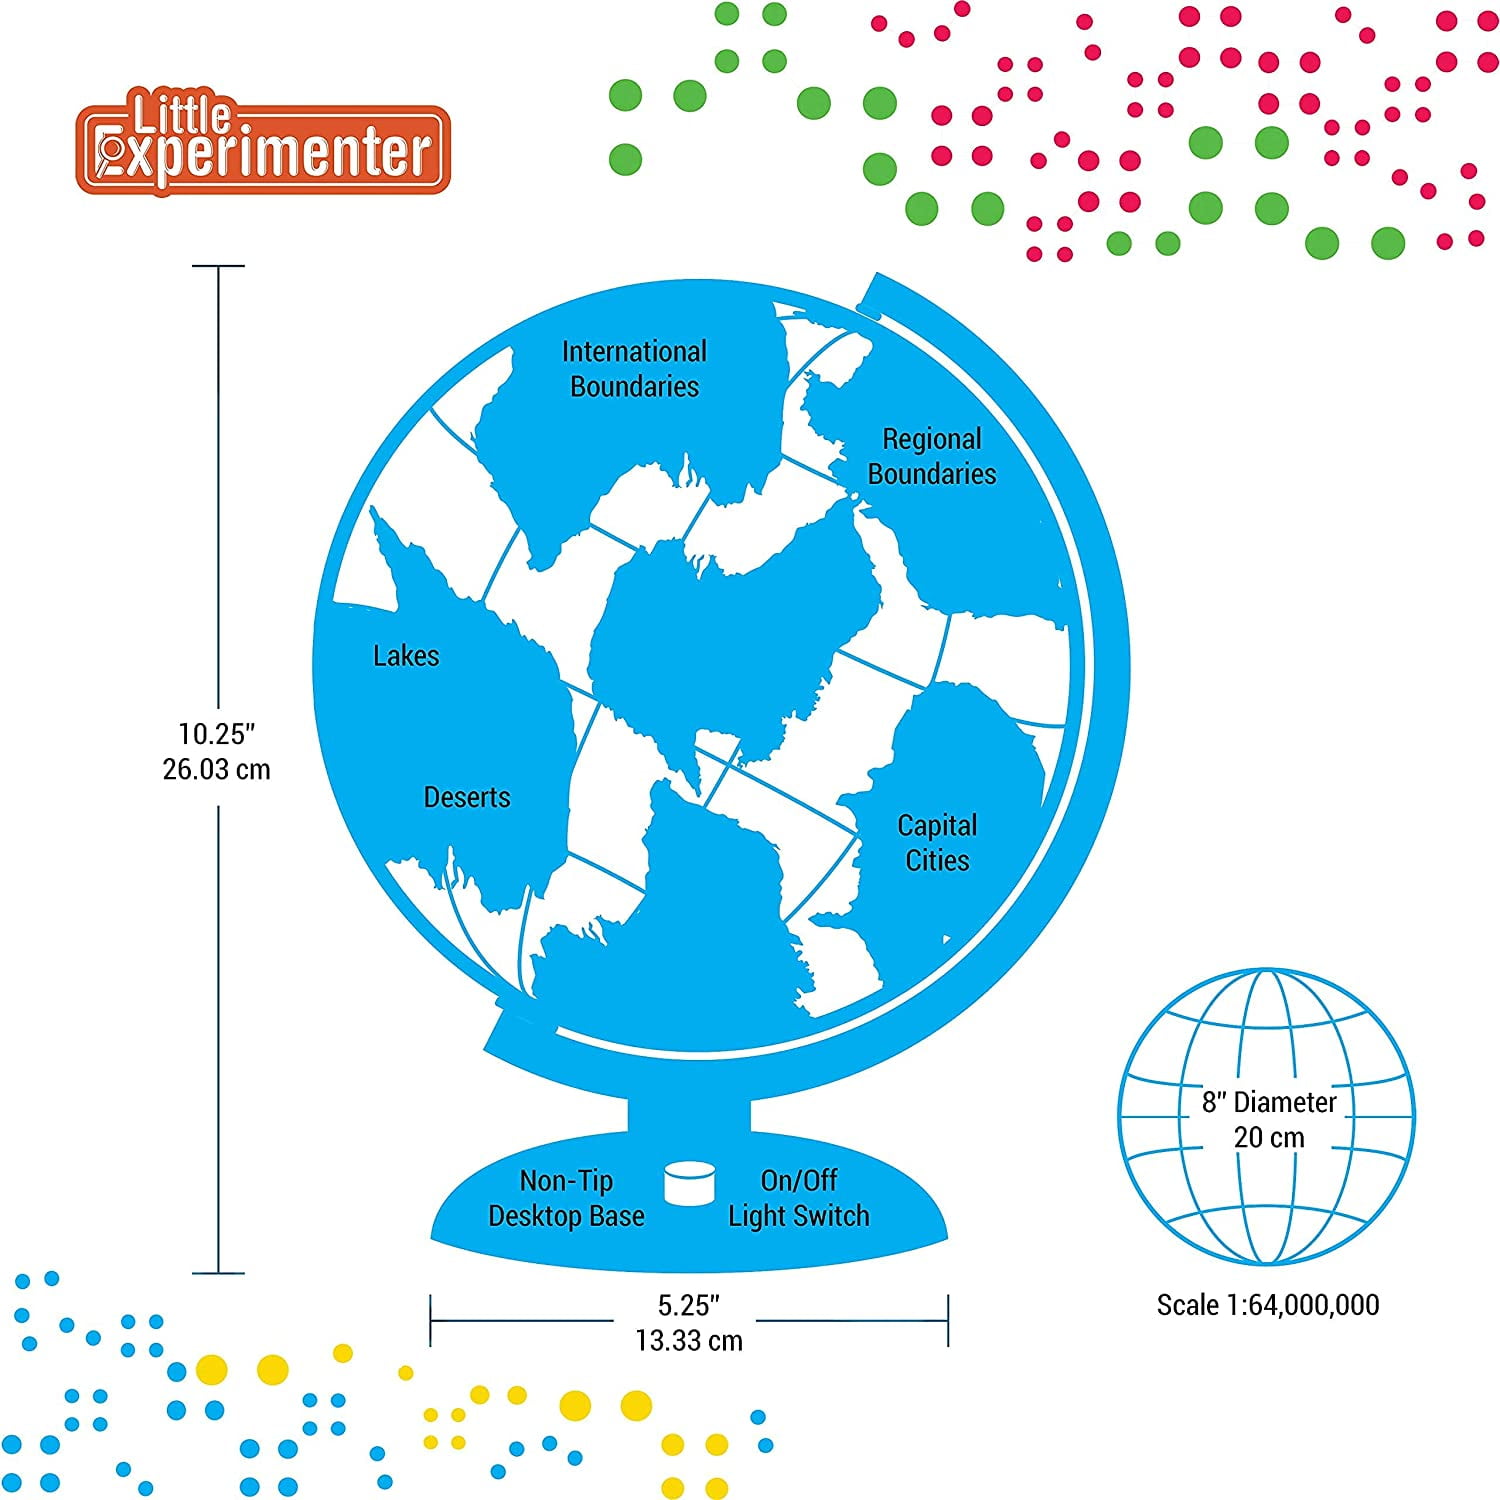 Little Experimenter Talking Globe - Interactive Globe for Kids Learning  with Smart Pen - Educational World Globe for Children with Interactive Maps  –